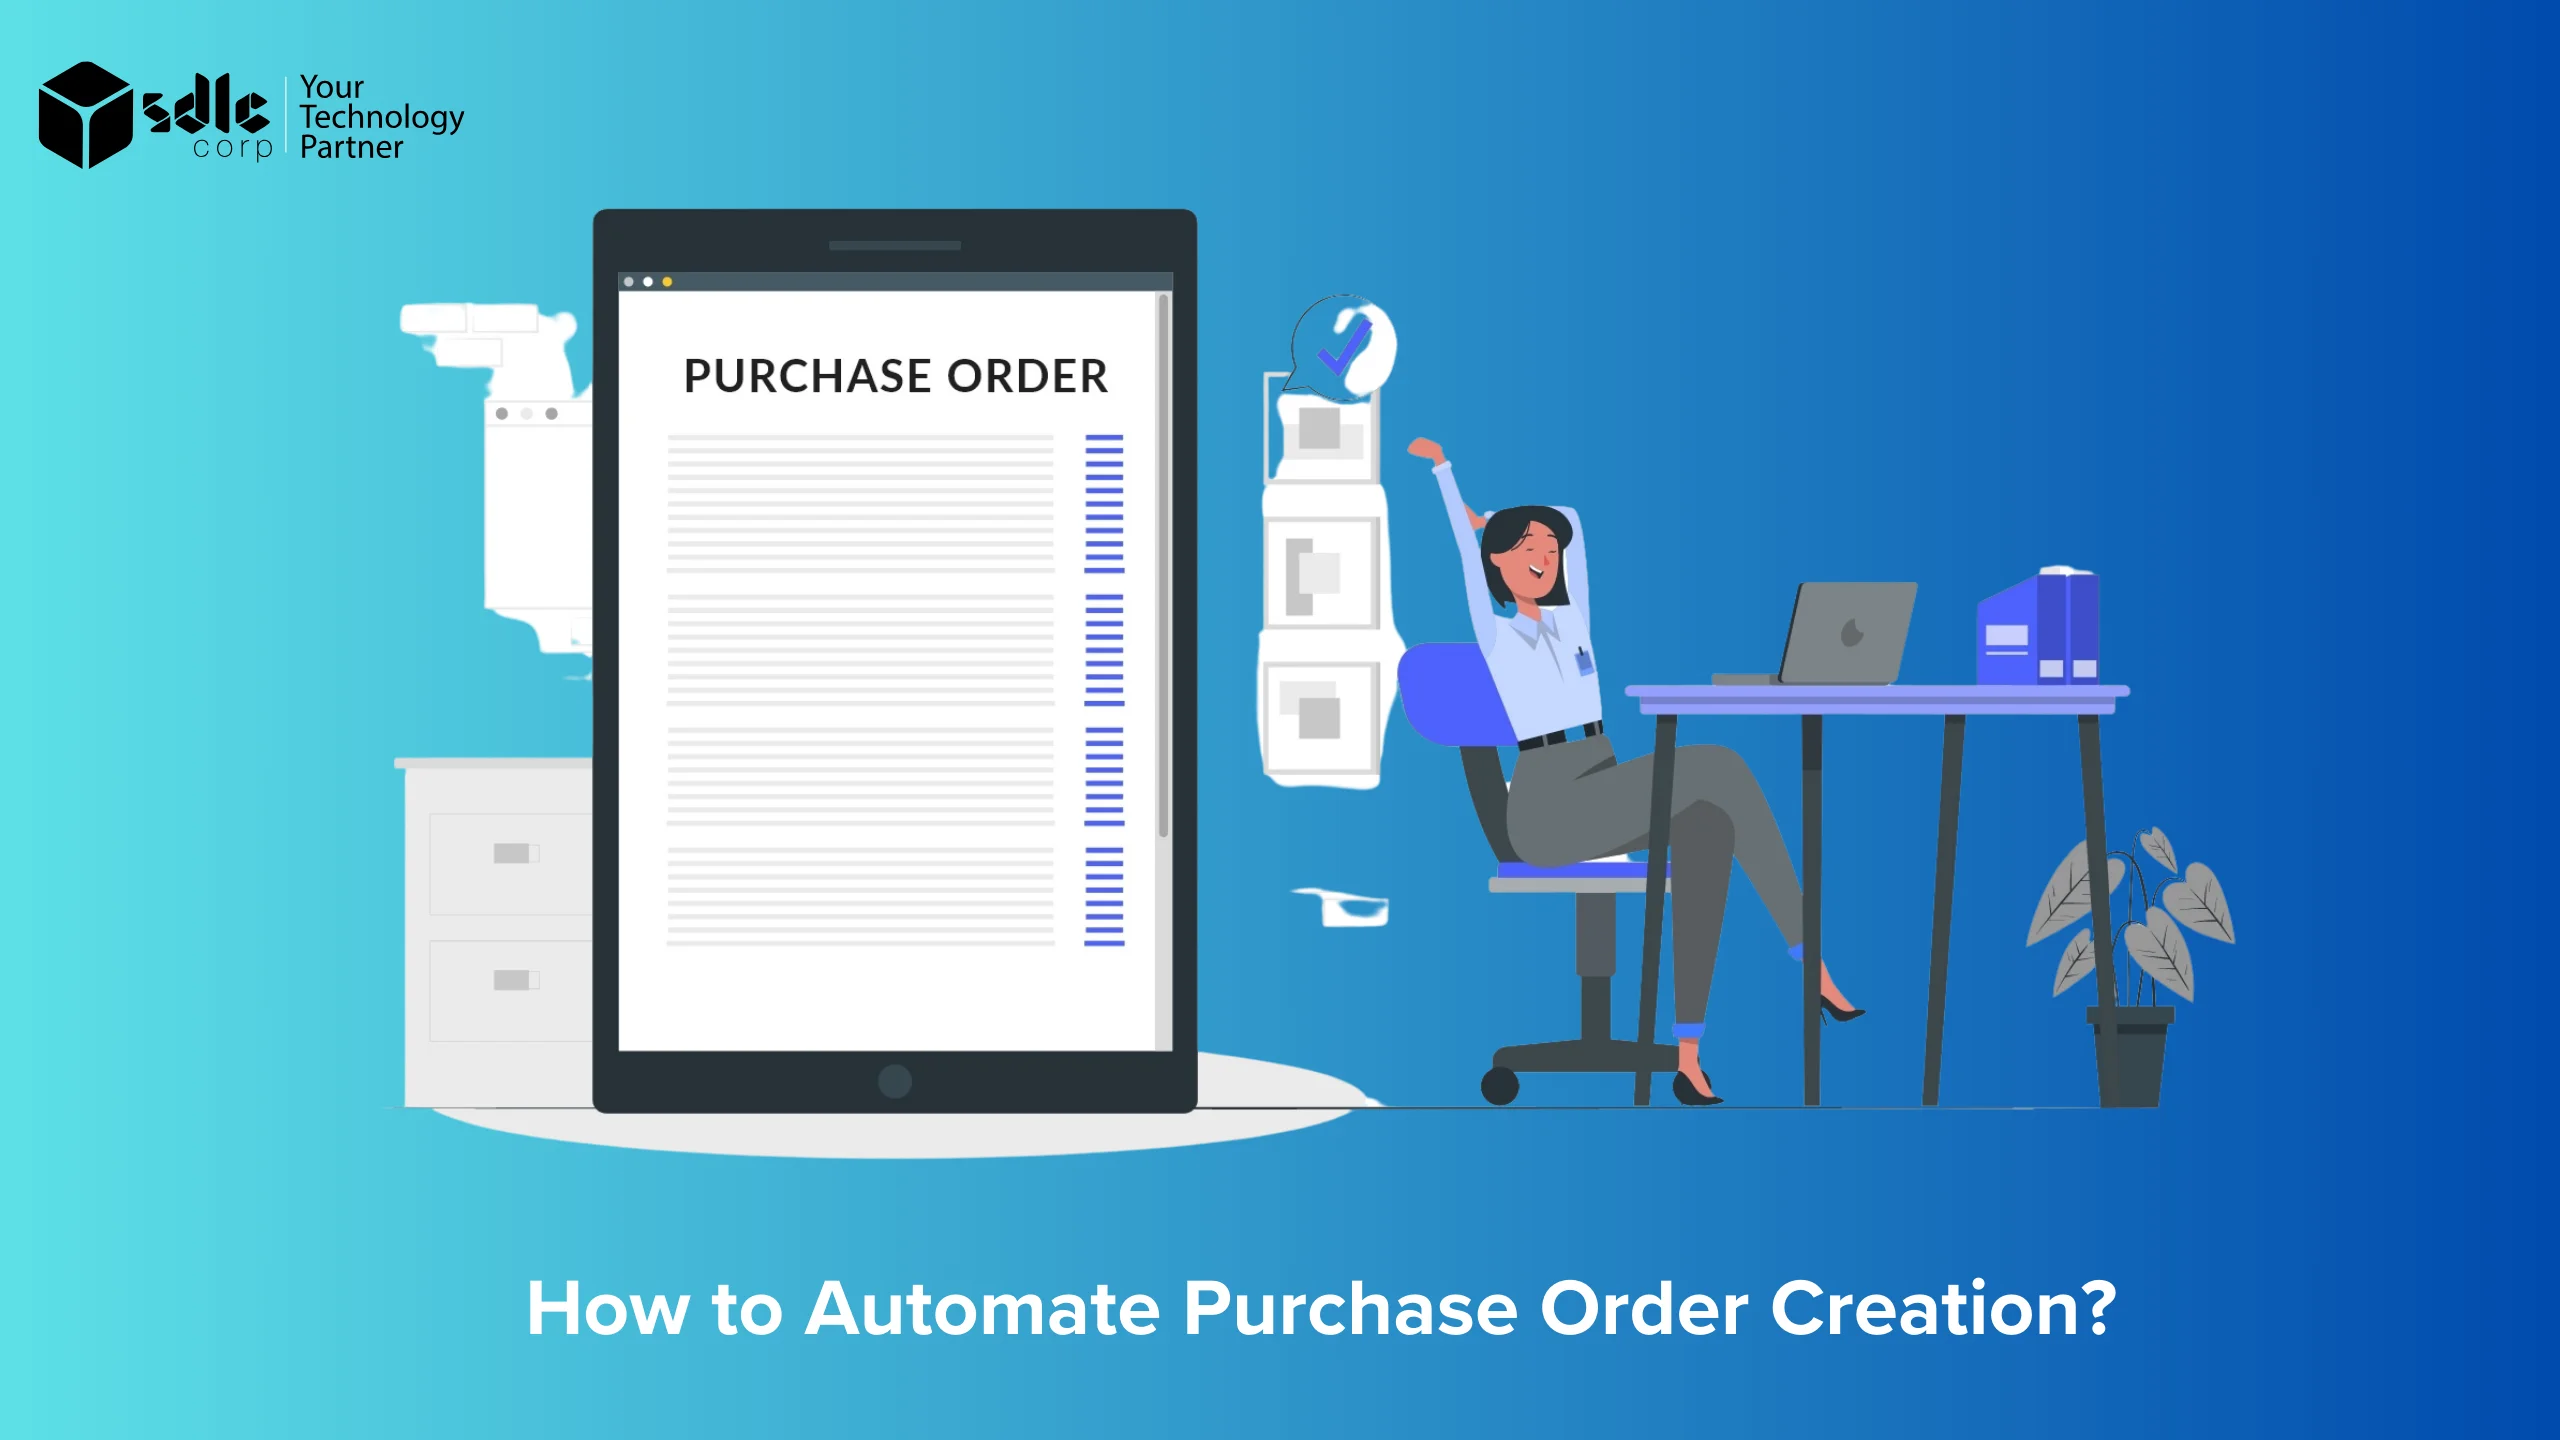 How to Automate Purchase Order Creation